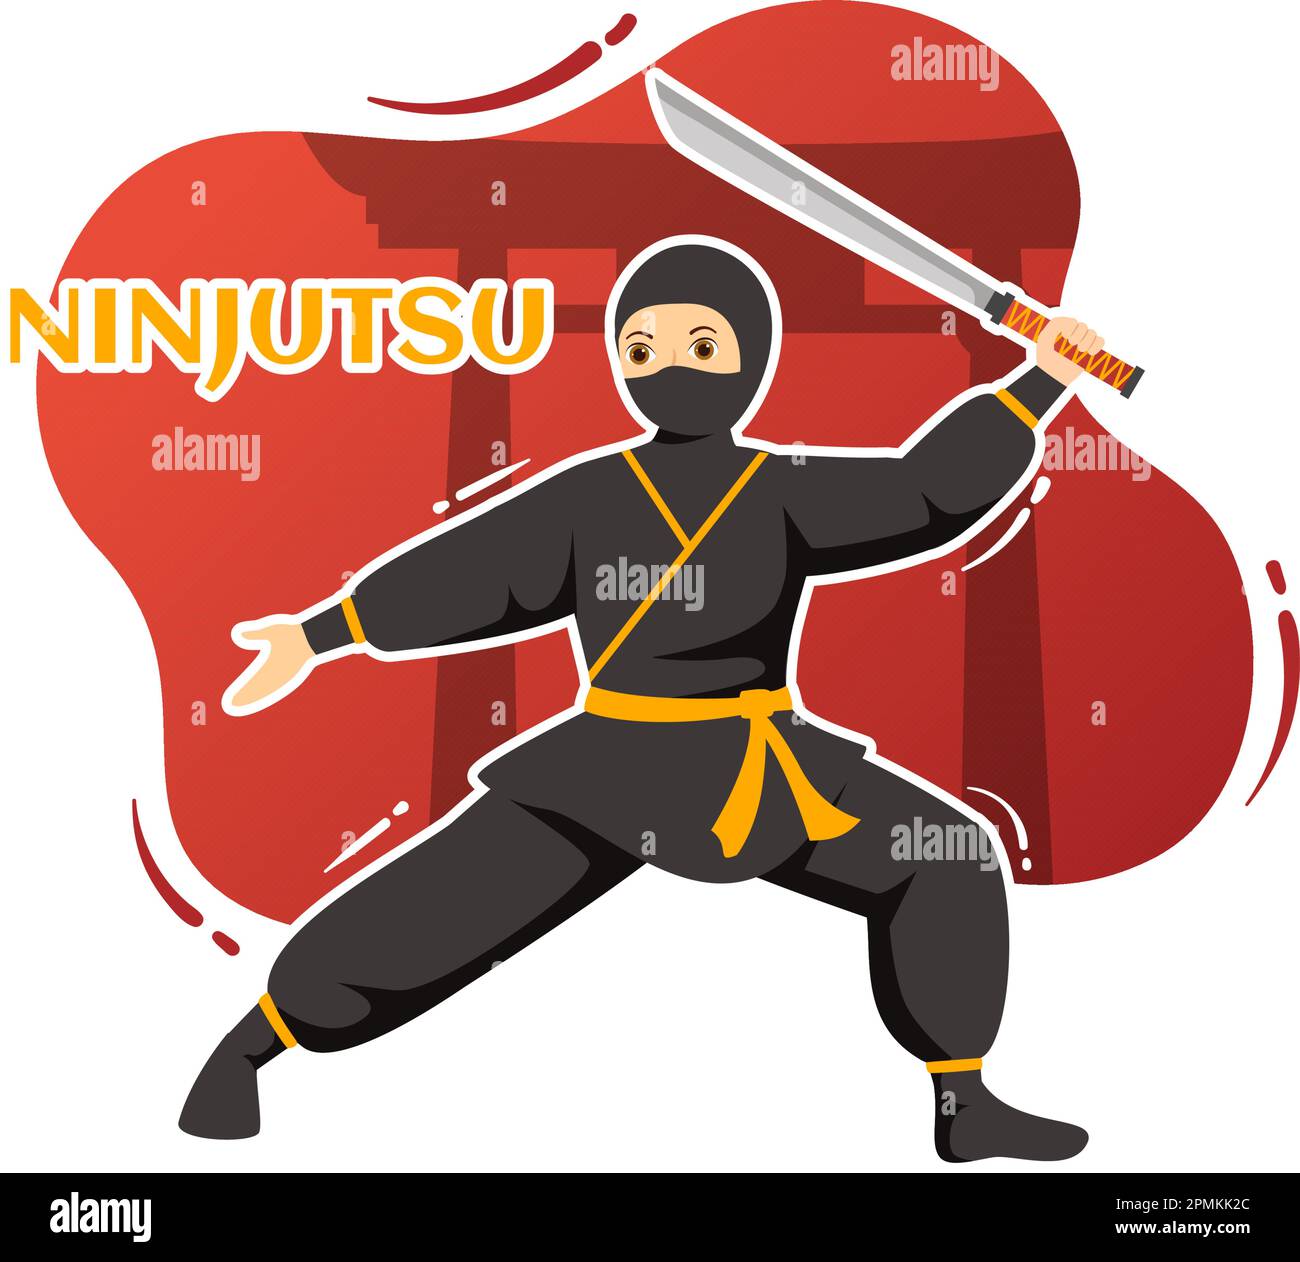 Free Vector  Hand drawn ninja character in different poses